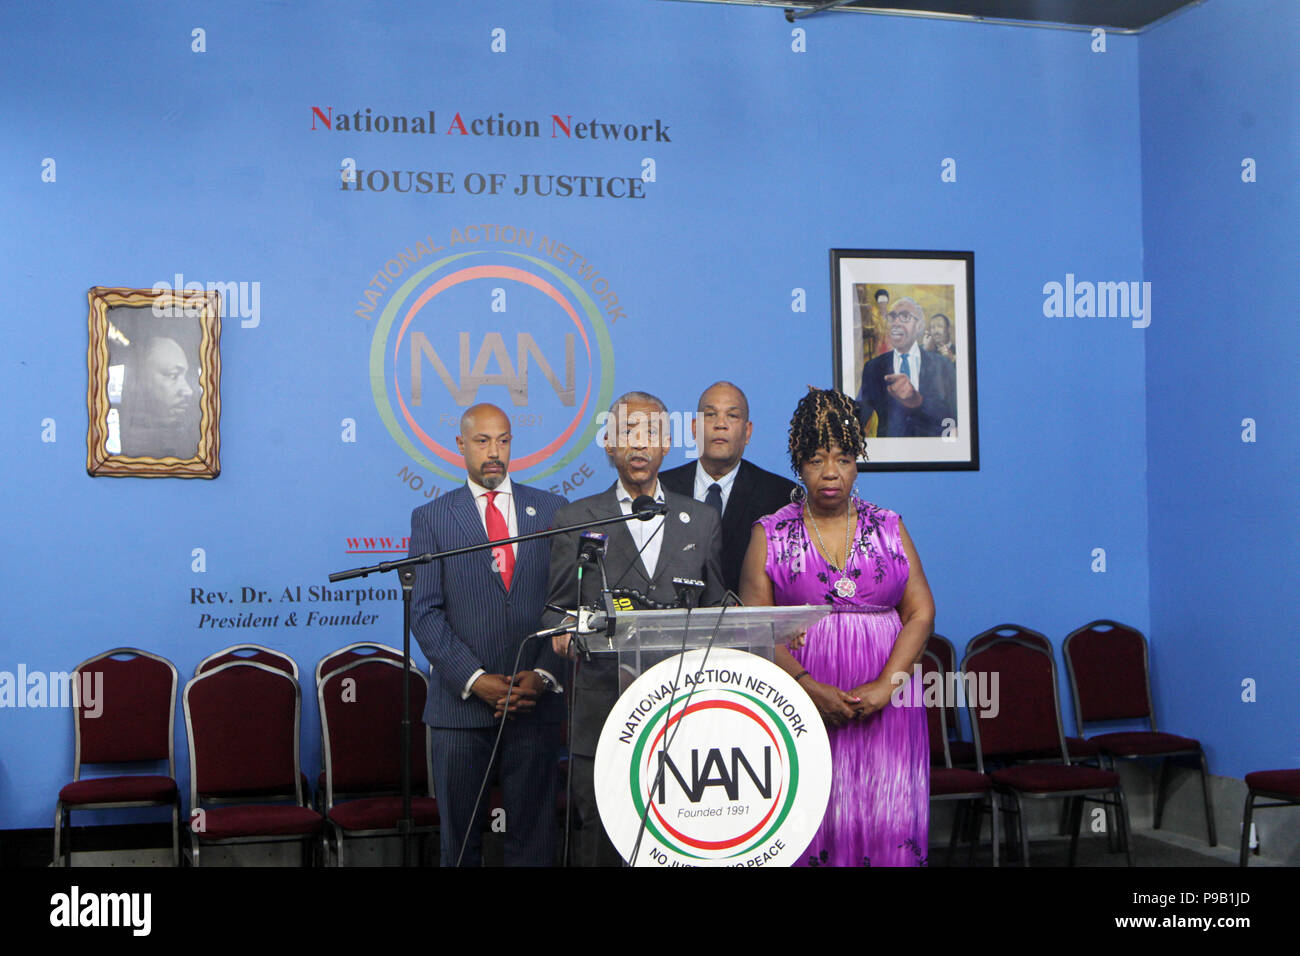 New York, USA. 16th July, 2018.  (L-R) Rev. Kirsten John Foy, Northeast Regional Director, National Action Network, Rev. Al Sharpton, Founder & President, National Action Network, Gwen Carr, Mother of Eric Garner and Attorney Michael Hardy, Co-Founder, National Action Network attend press conference announcing that the NYPD will process with disciplinary action against NYPD Officer Daniel Pantaleo by September in the absence of further action from the DOJ in Eric Garner's case held at the House of Justice in the Harlem section of New York City. Credit: MediaPunch Inc/Alamy Live News Stock Photo